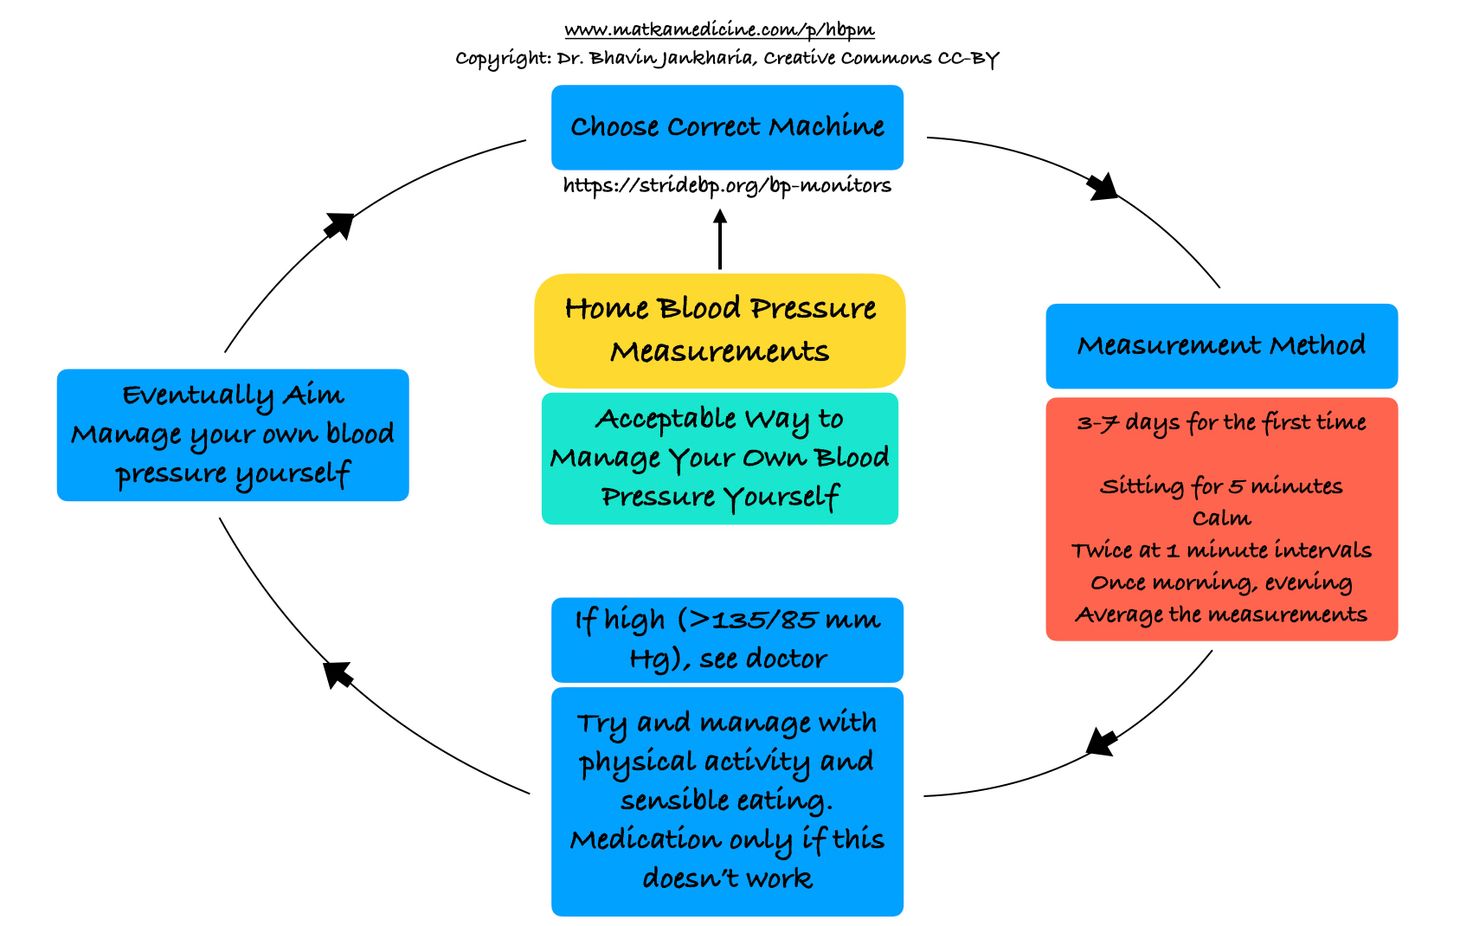 Measuring Your Own Blood Pressure at Home